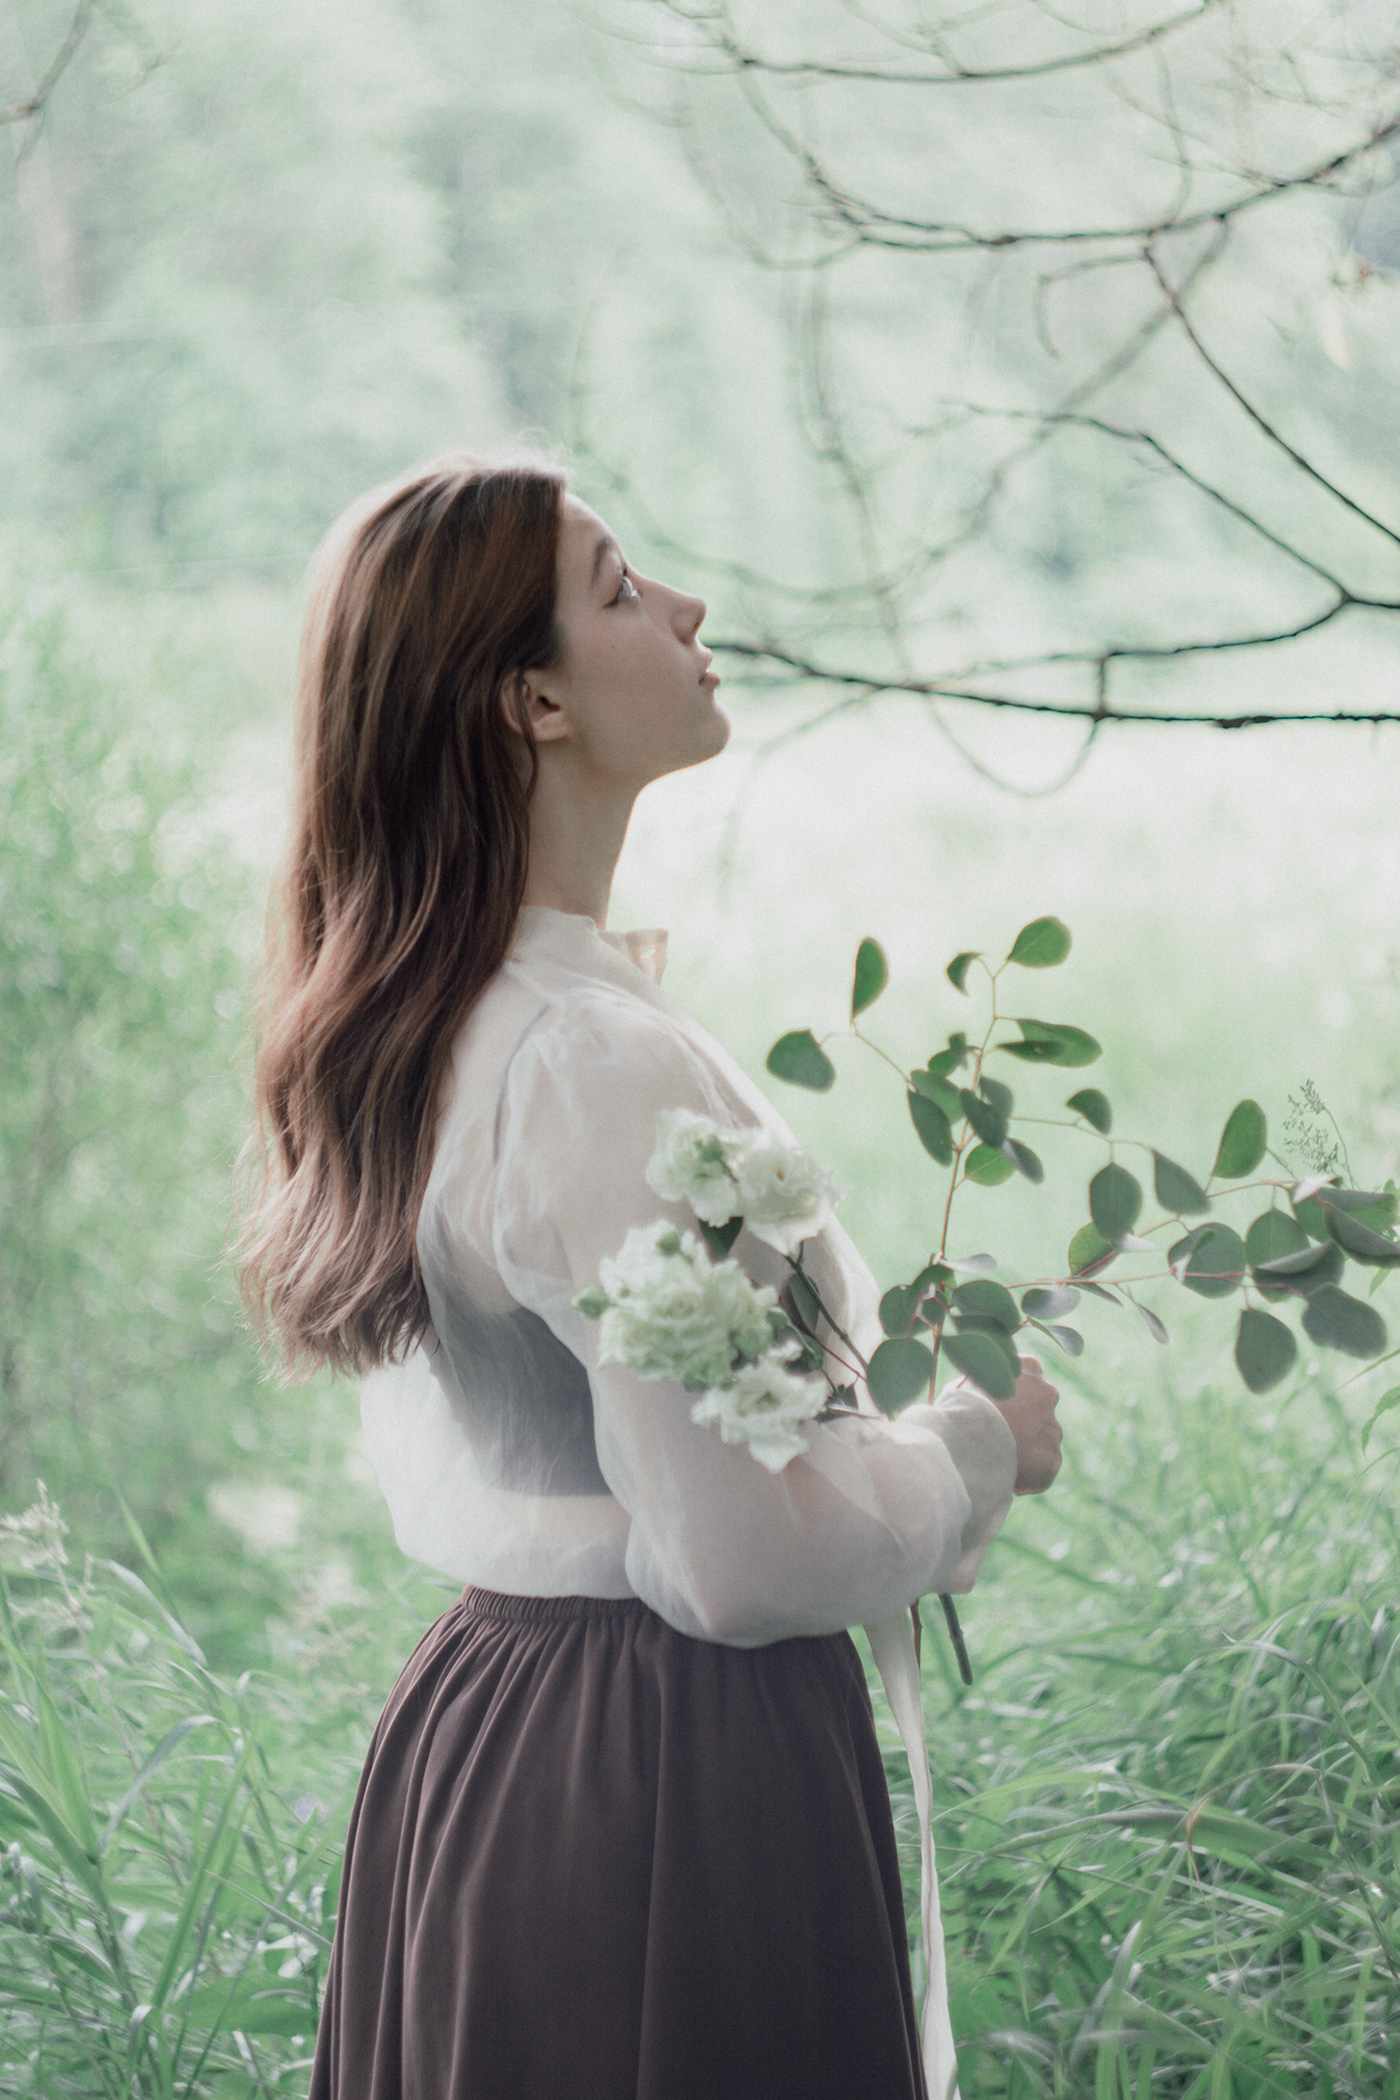 helios 44-2 Photography  photographer Nature lightroom photoshoot portrait dreamy photography  dreamy presets glowing photography